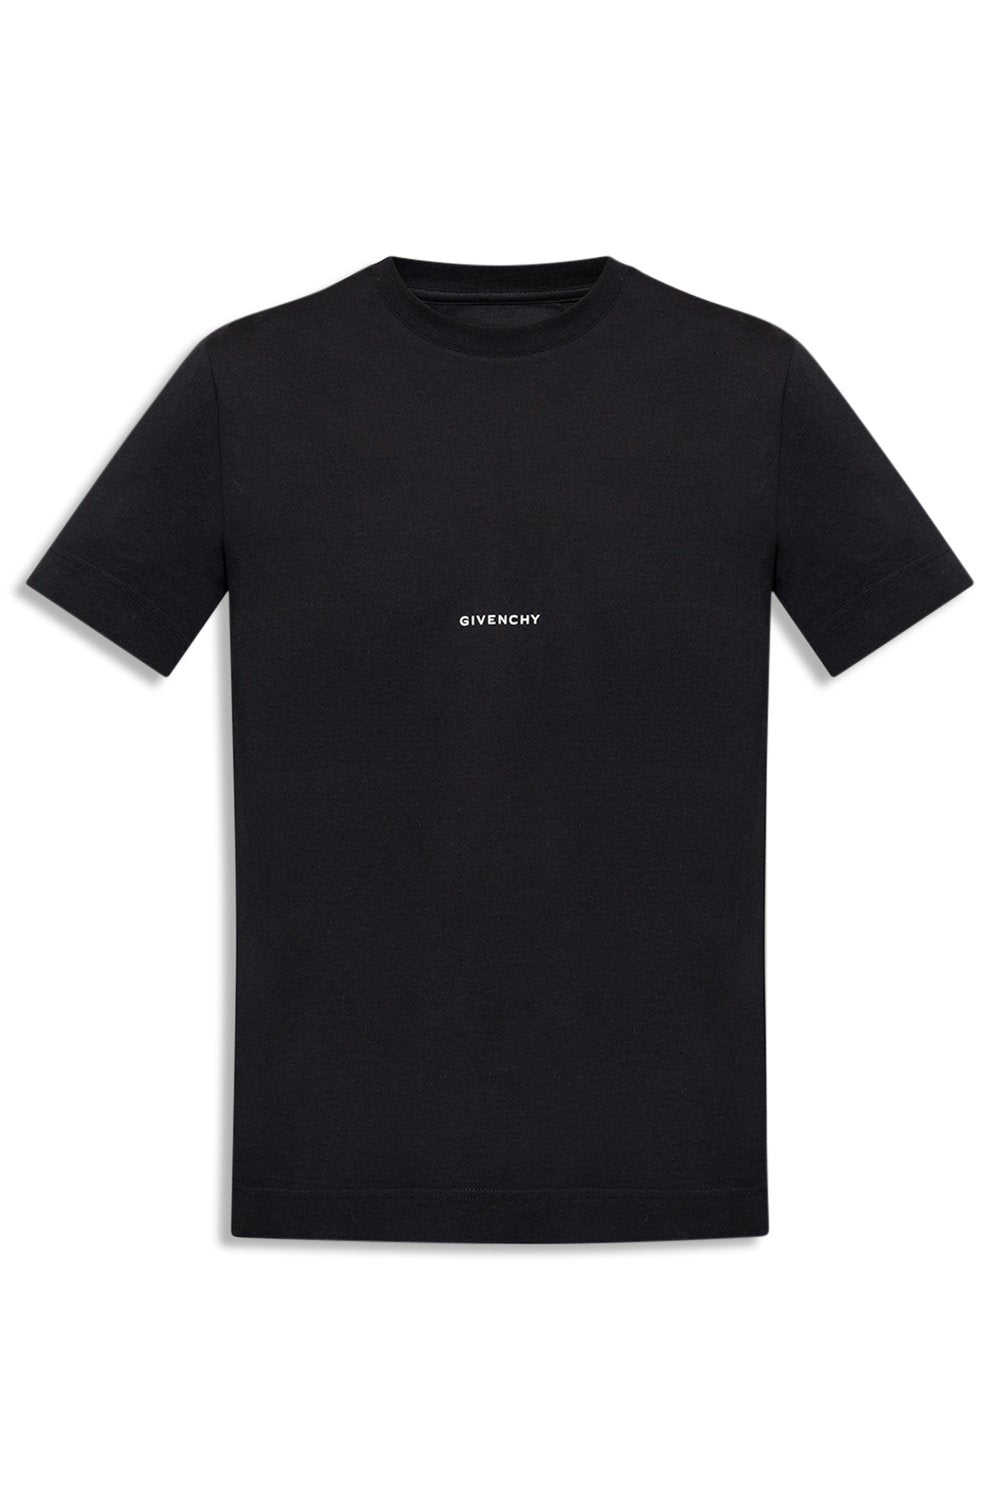 Men's Black Givenchy Small Logo Slim Fit Jersey T-Shirt